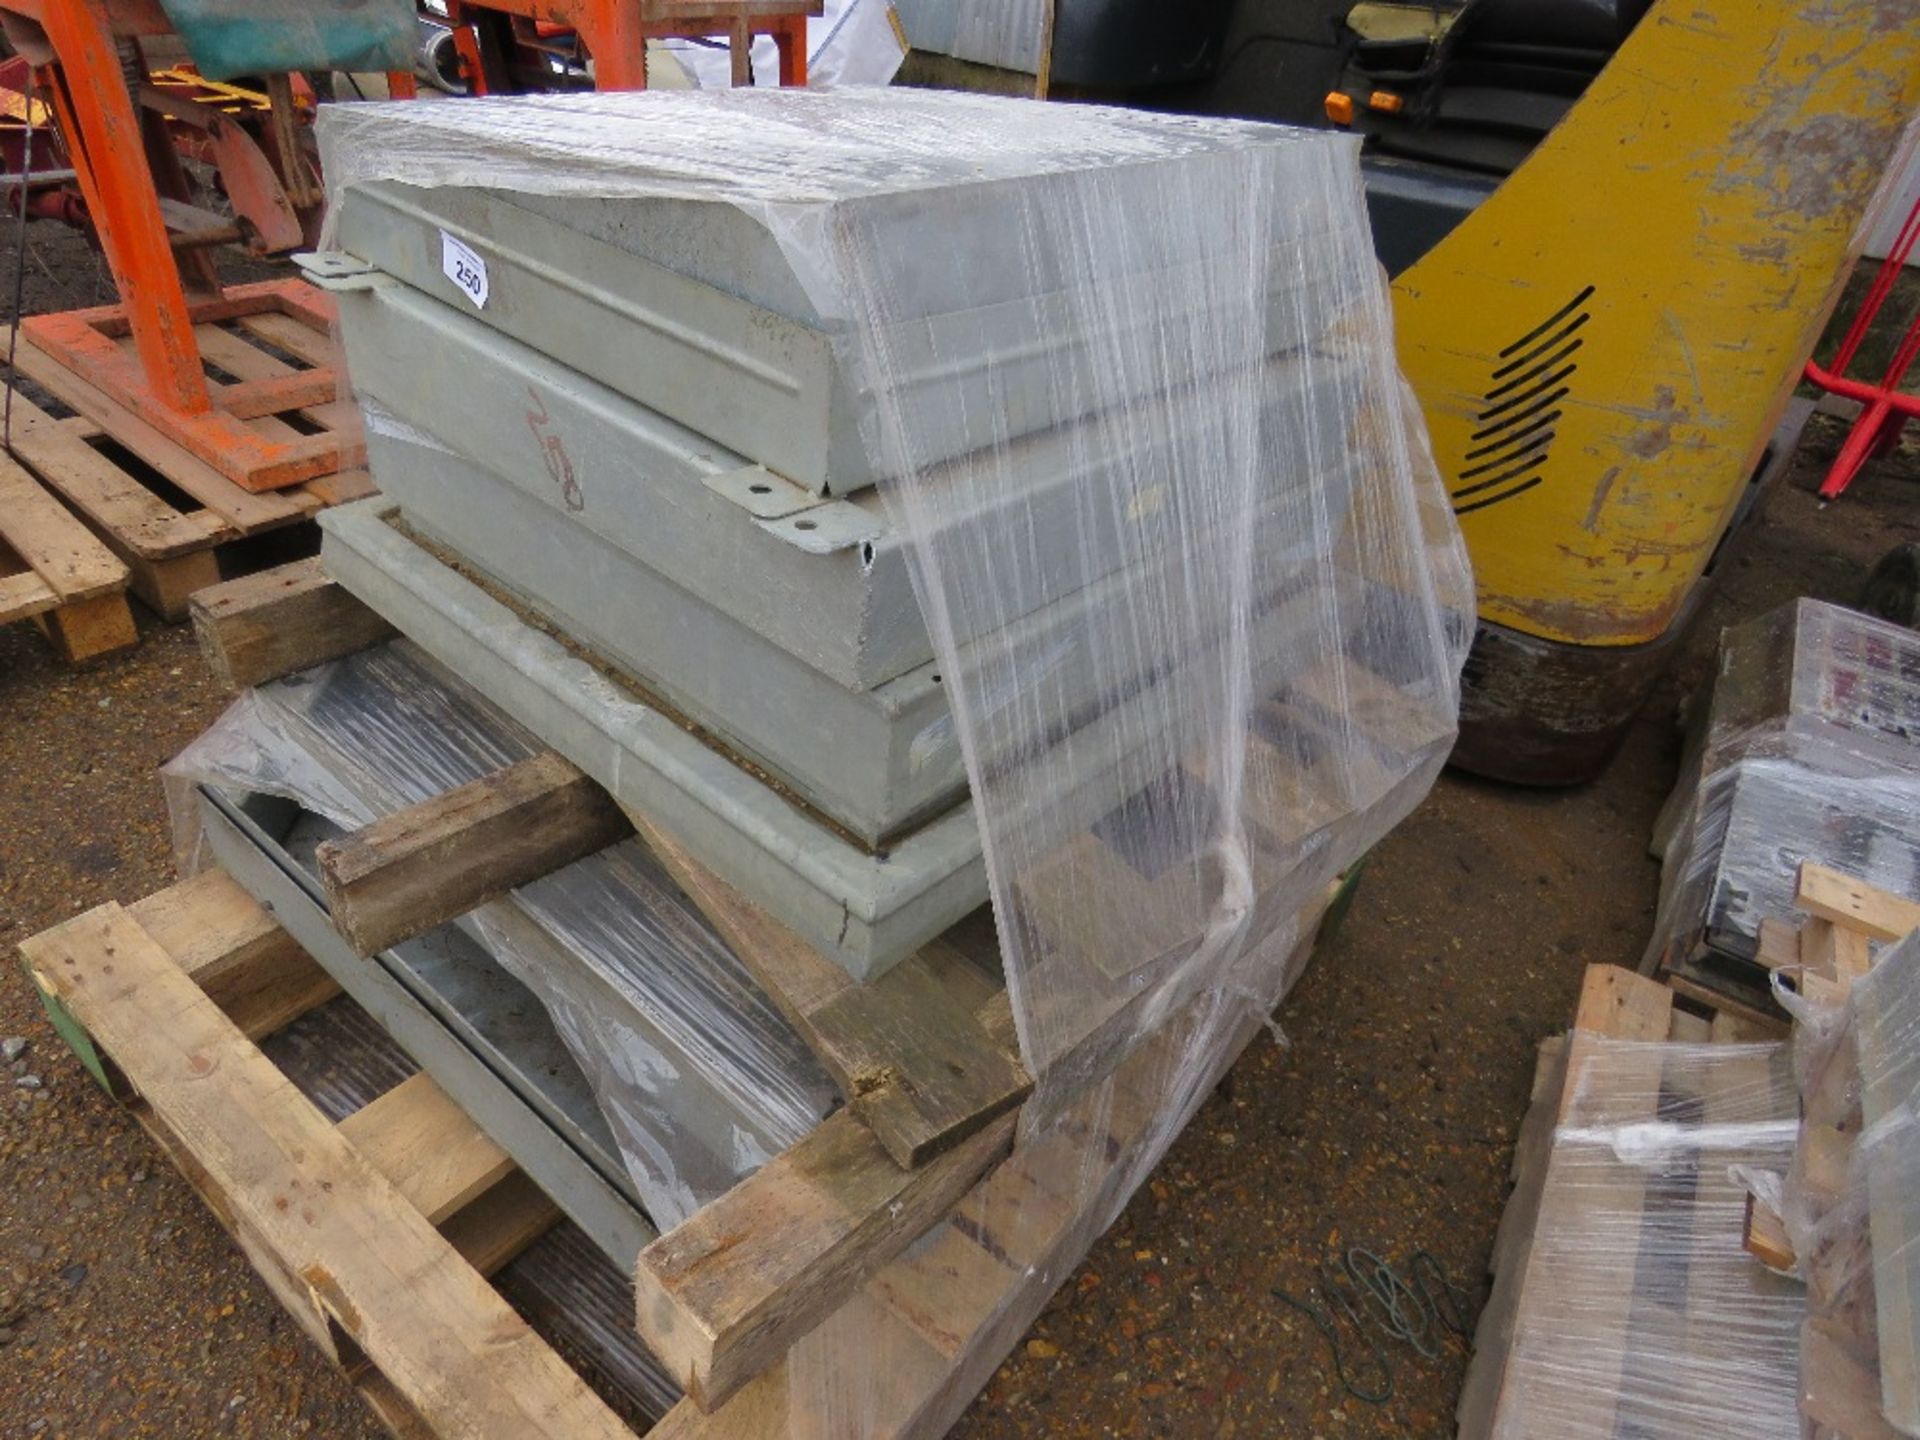 2 X PALLETS OF MANHOLE COVERS WITH SURROUNDS: 4 X GALVANISED 600X600X100 B125 UNITS PLUS 1 X 850X850 - Image 2 of 4